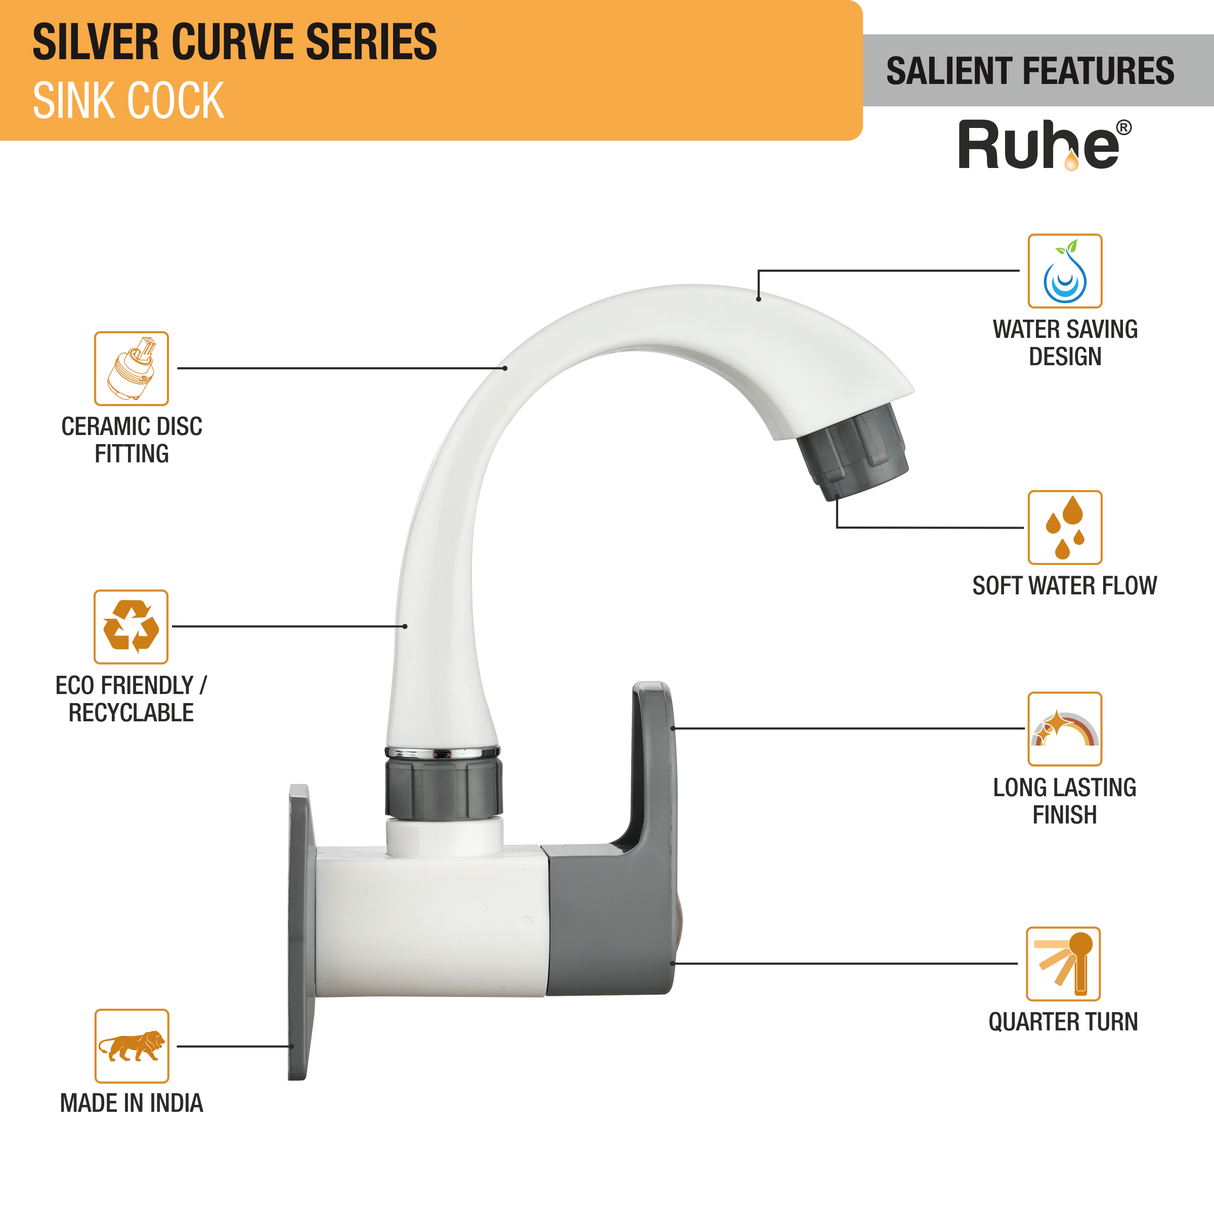 Silver Curve PTMT Sink Cock with Swivel Spout Faucet features and benefits